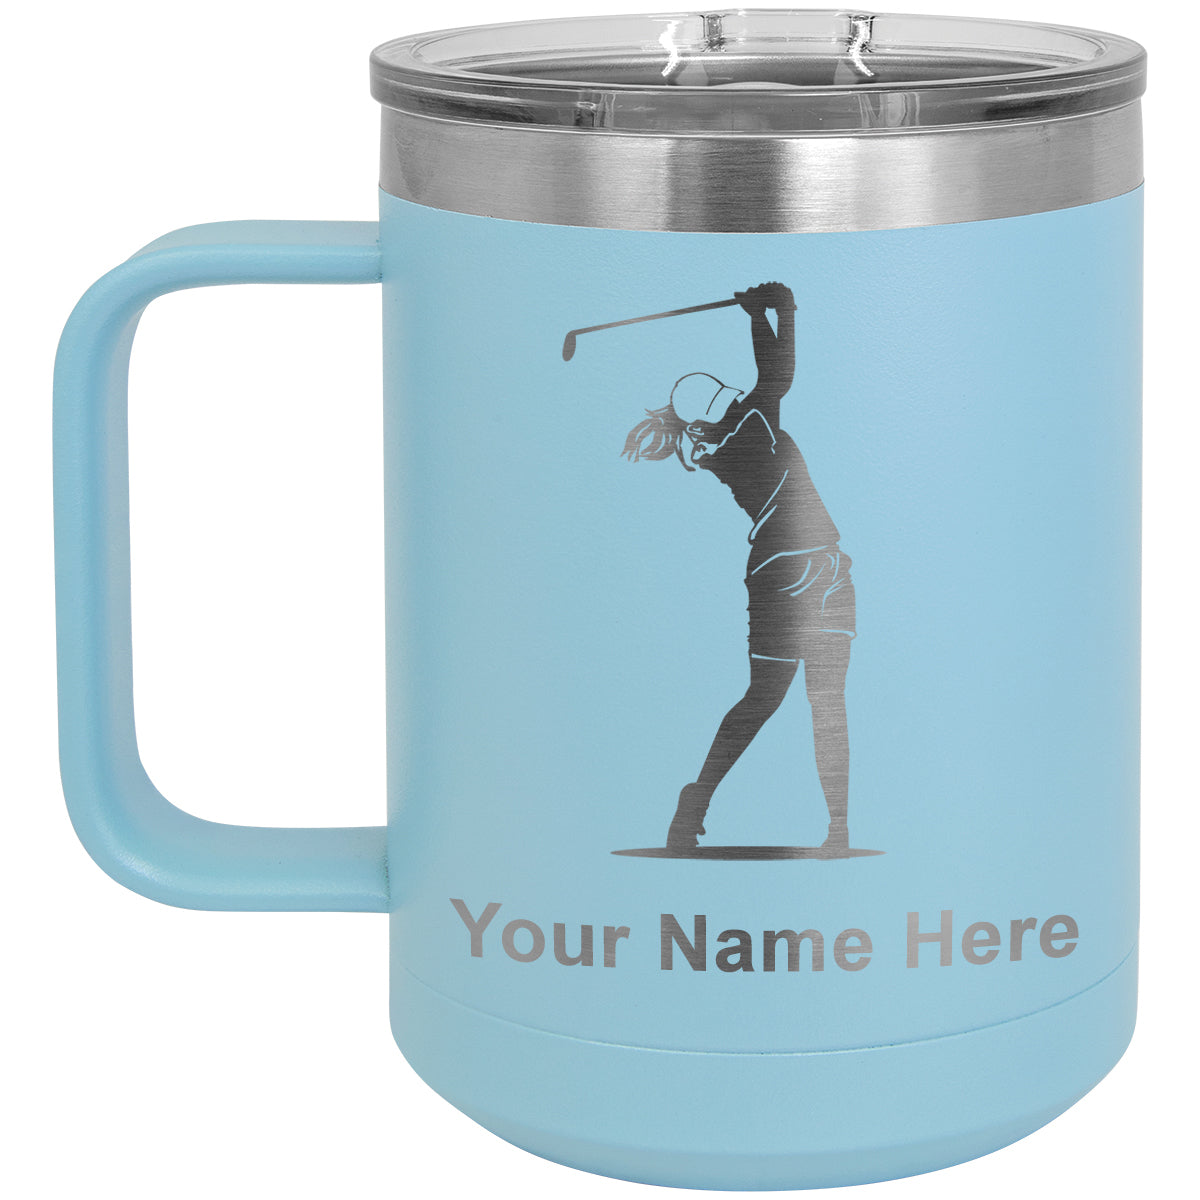 15oz Vacuum Insulated Coffee Mug, Golfer Woman, Personalized Engraving Included